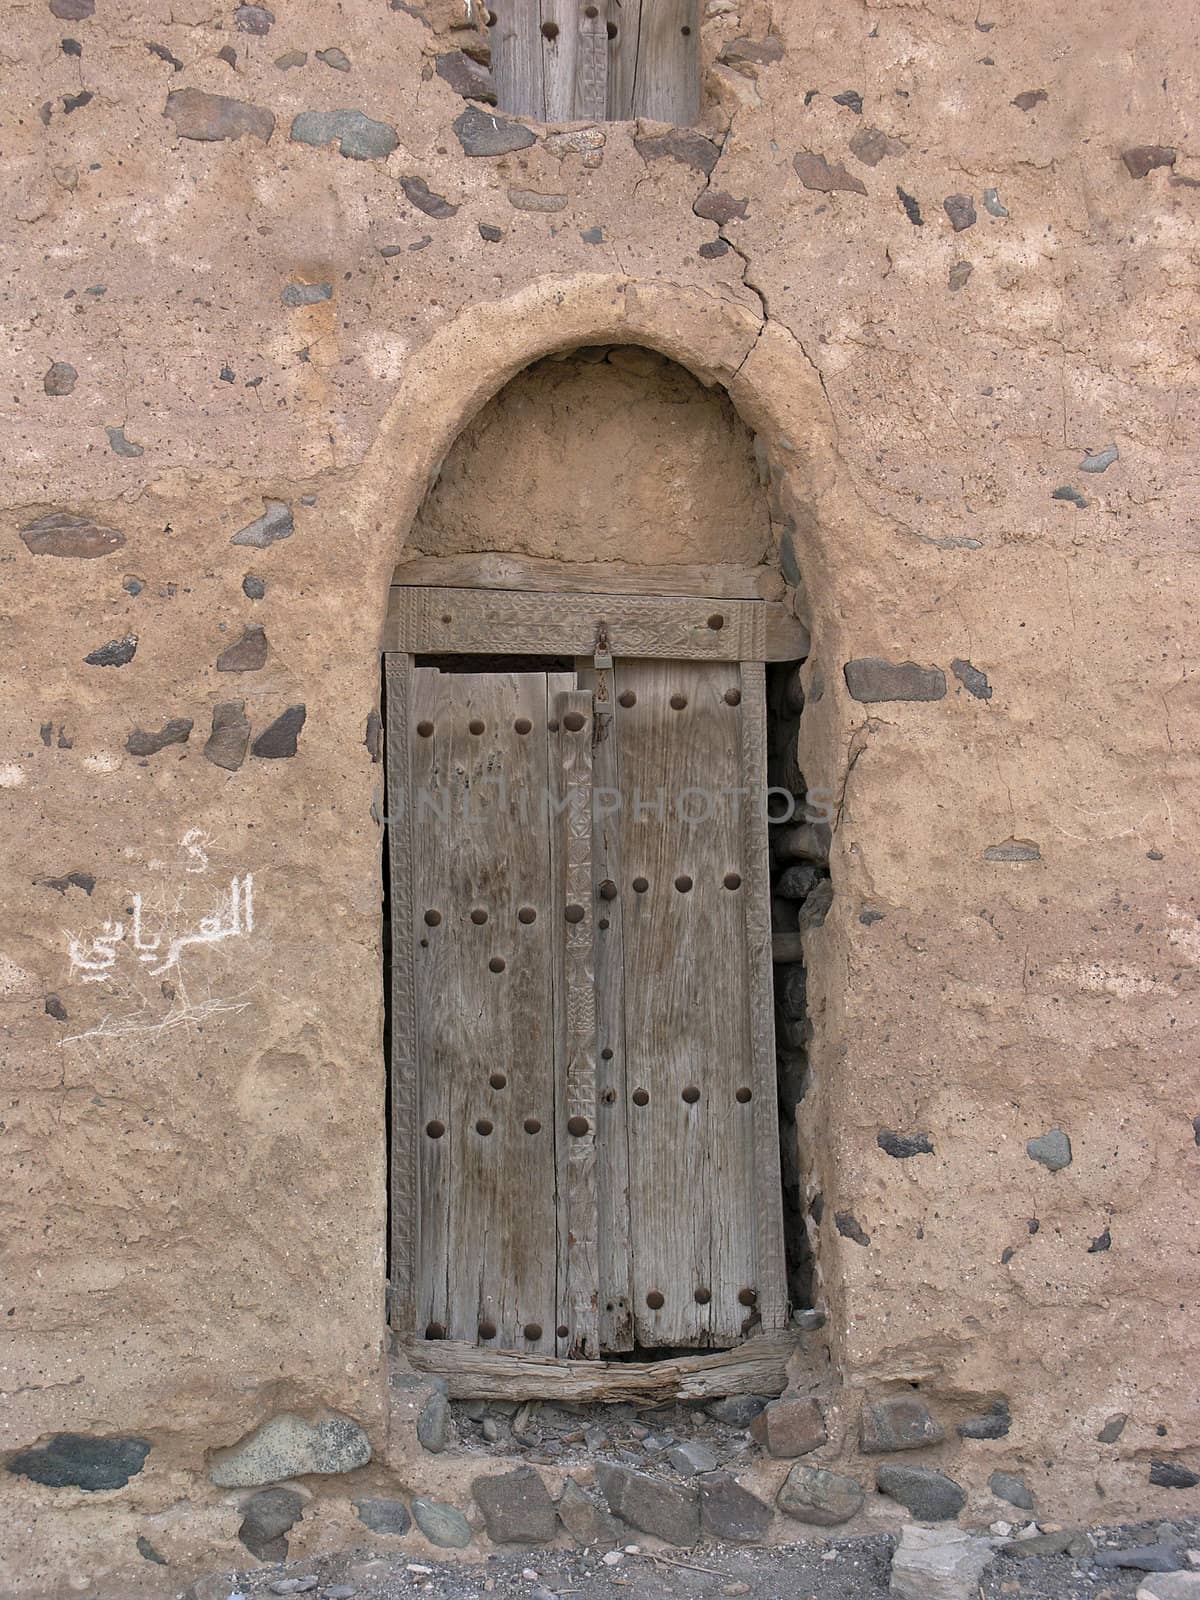 The door of the old fort at Al Naslah, United Arab Emirates.